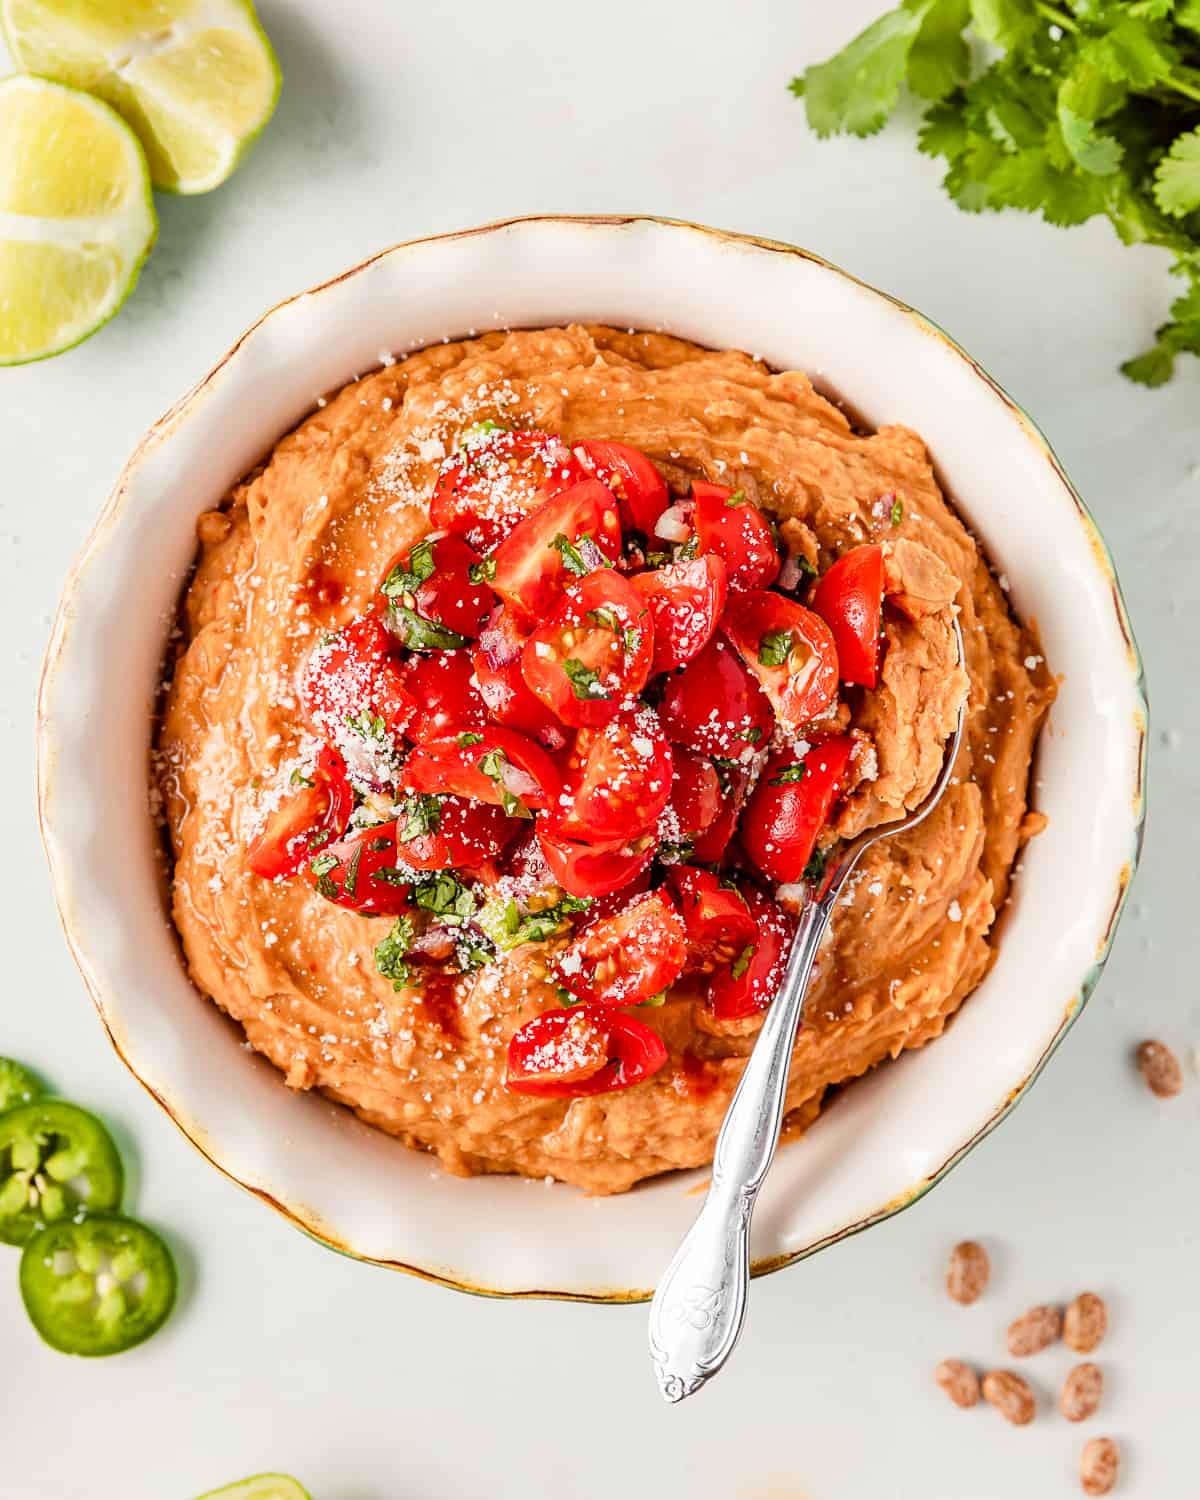 Refried Beans with Tomato Salsa